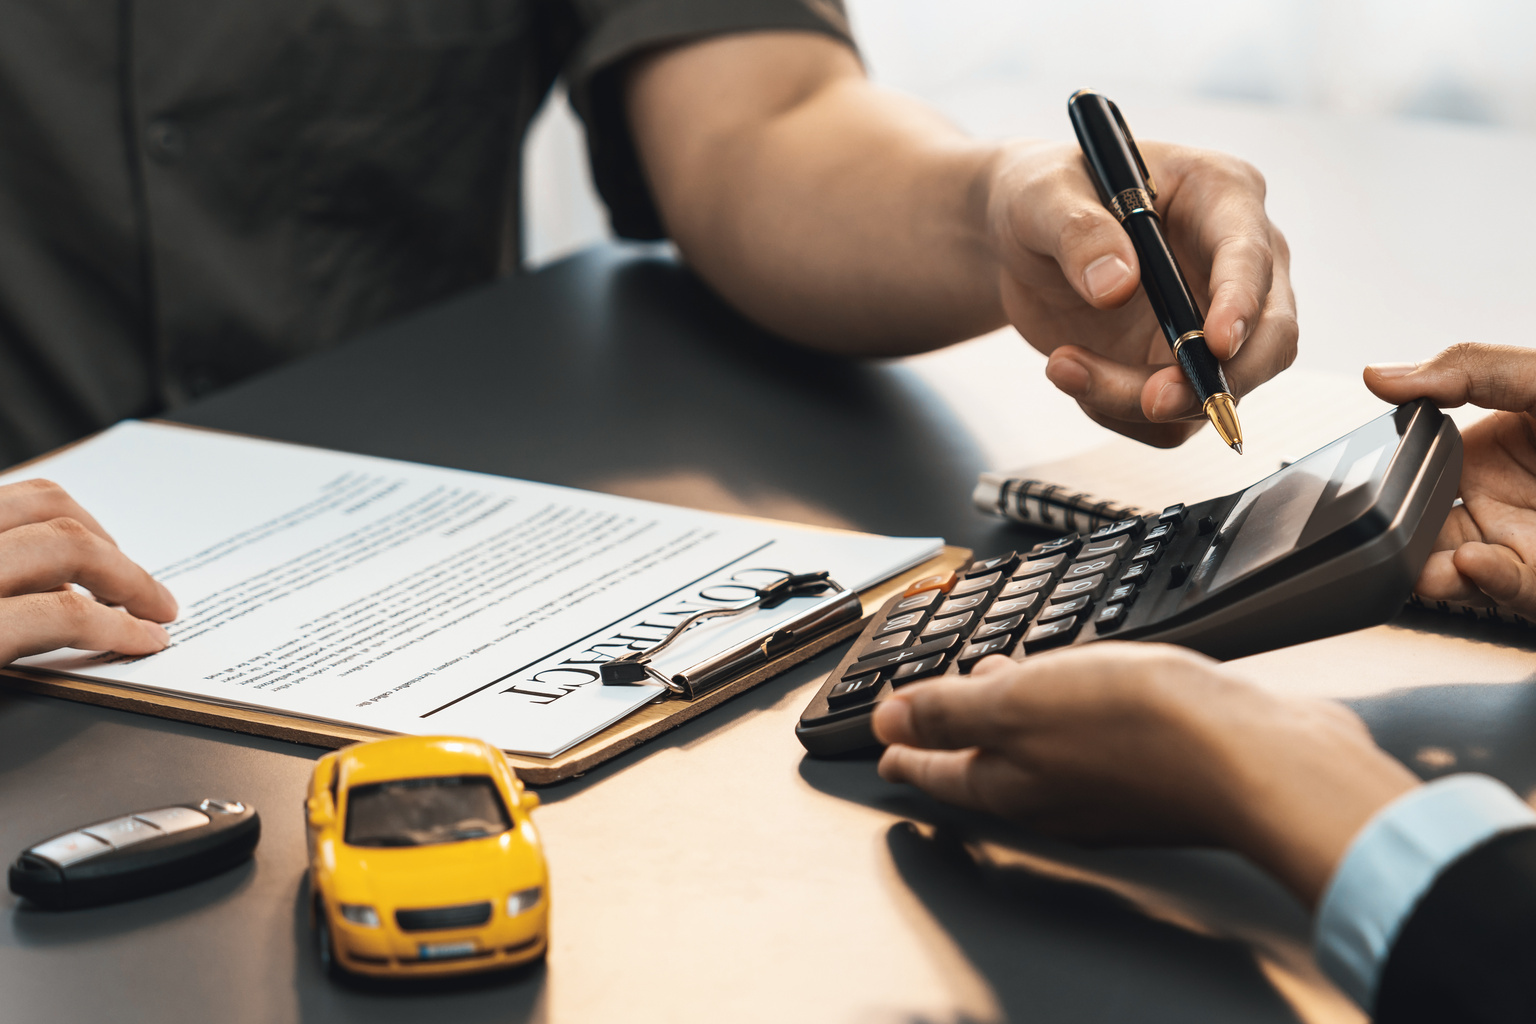 3 reasons why auto lenders need a purpose-built digital lending solution